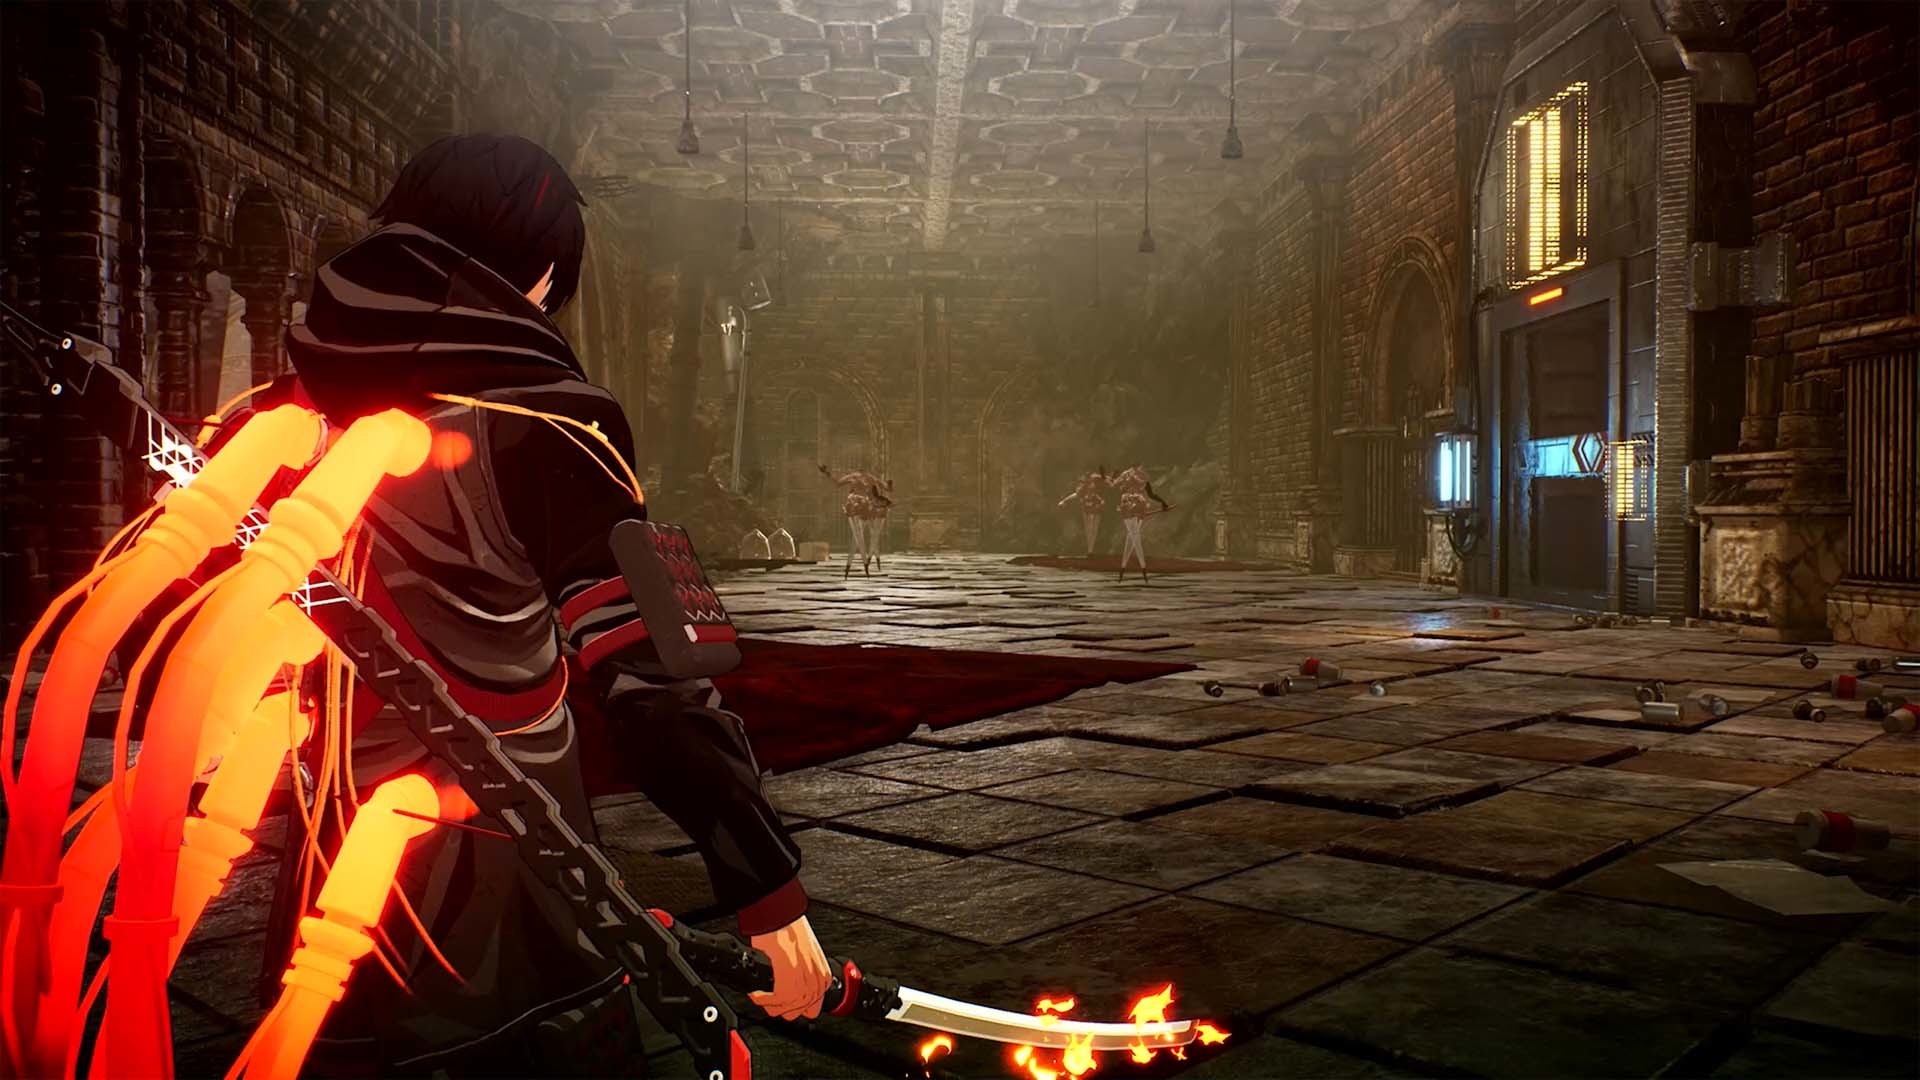 Scarlet Nexus - Release Date & System Requirements Revealed 